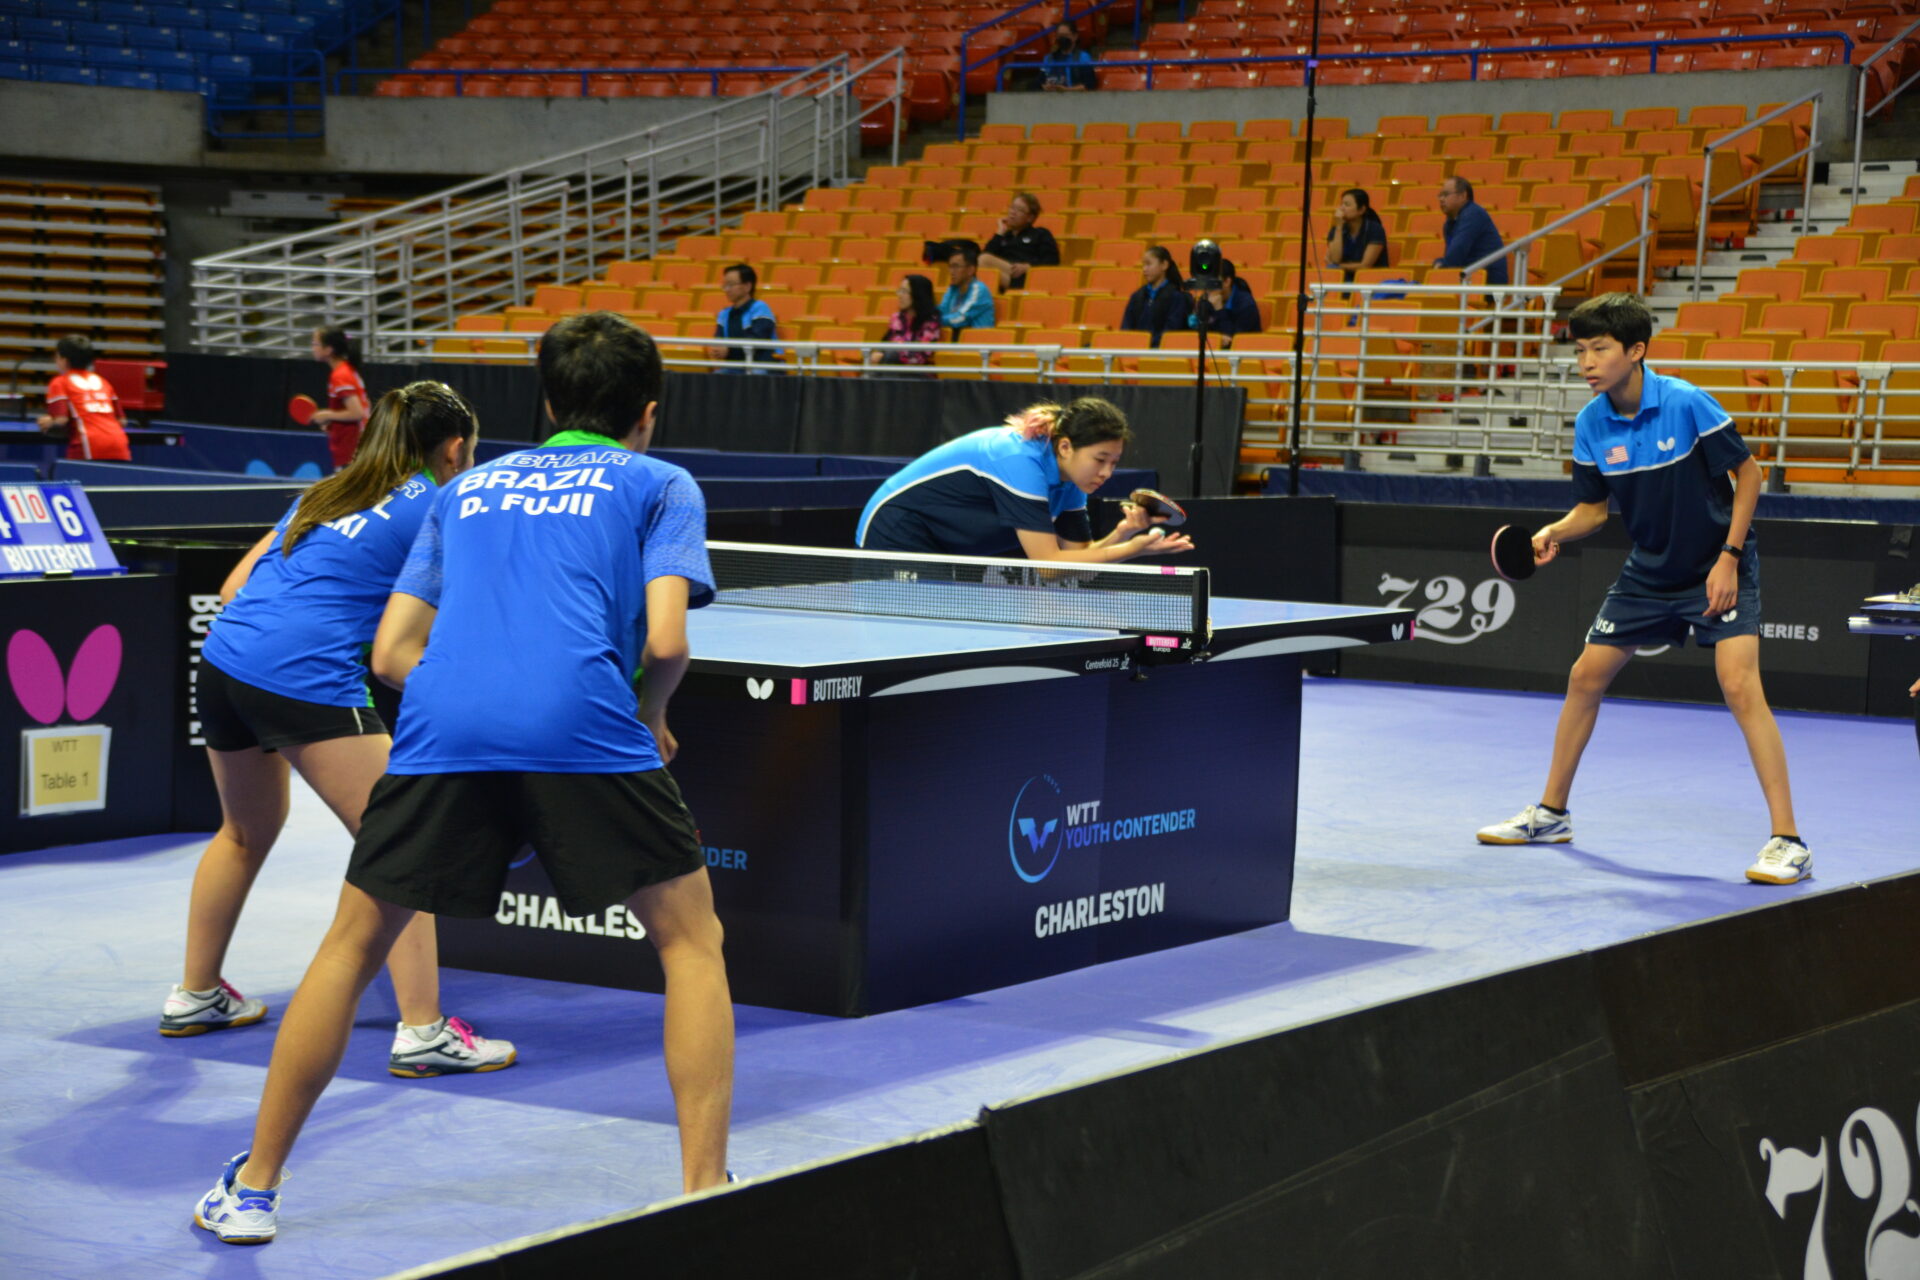 four young table tennis players face off in table tennis individual's world championship. They are all four in blue and black uniforms, playing mixed doubles. One boy and girl on each side of the table. On the far end of the table the girl is about to serve the ball. Other players are in wide stance ready to start play.